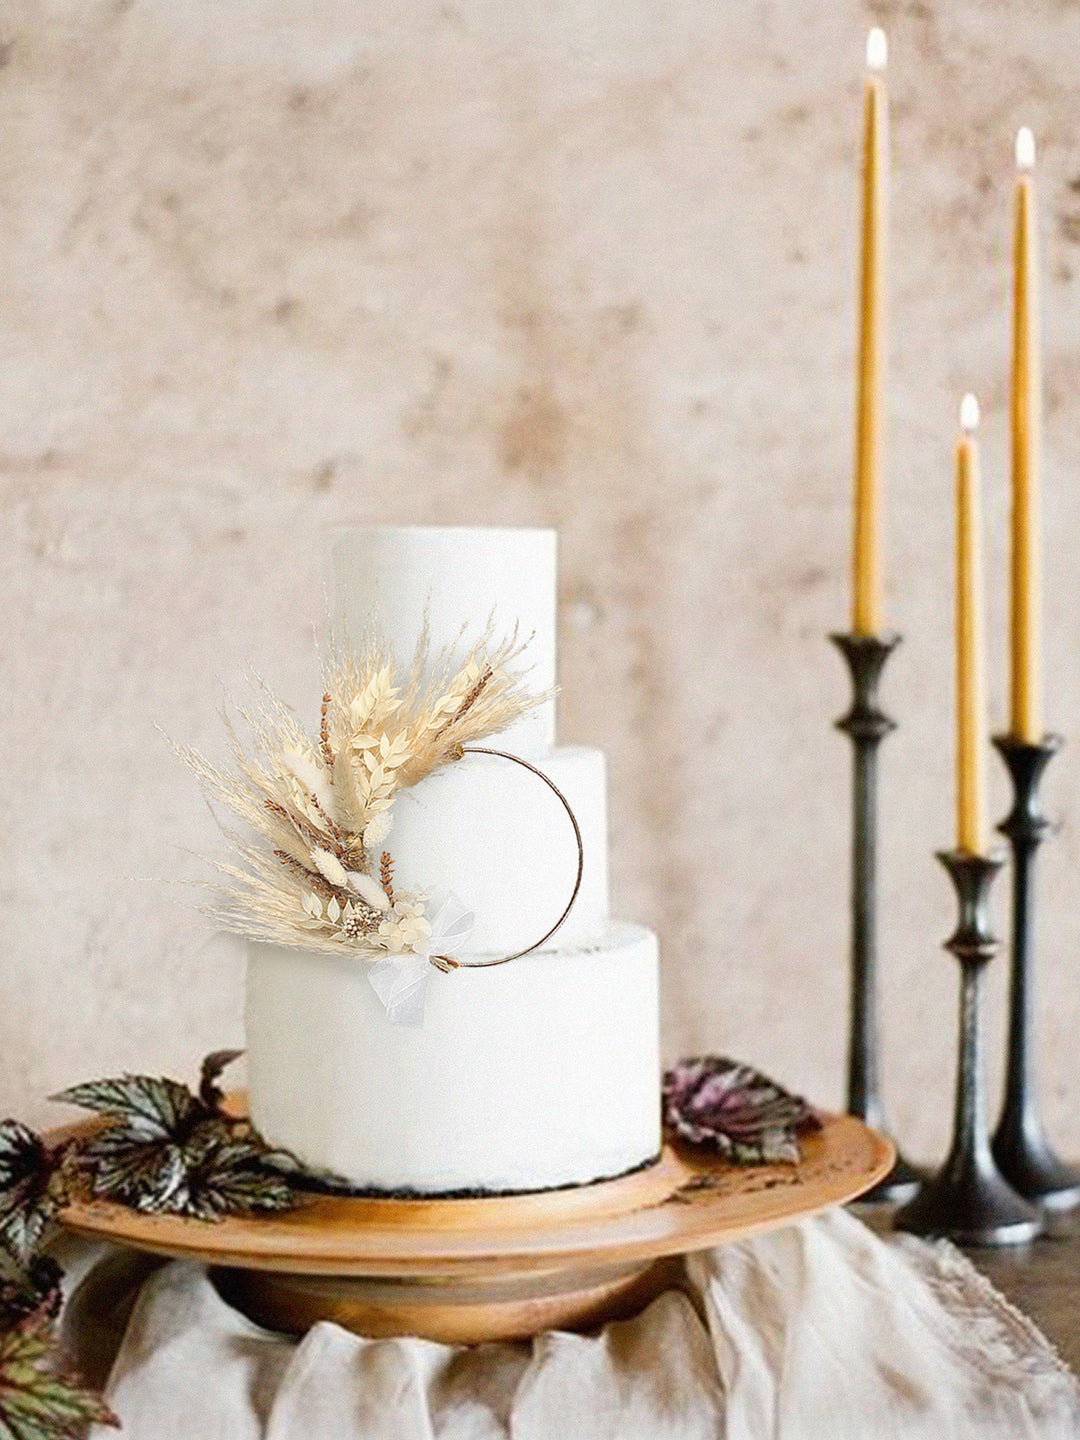 Why Floral Cake Toppers Are the Trending Choice for Modern Weddings?